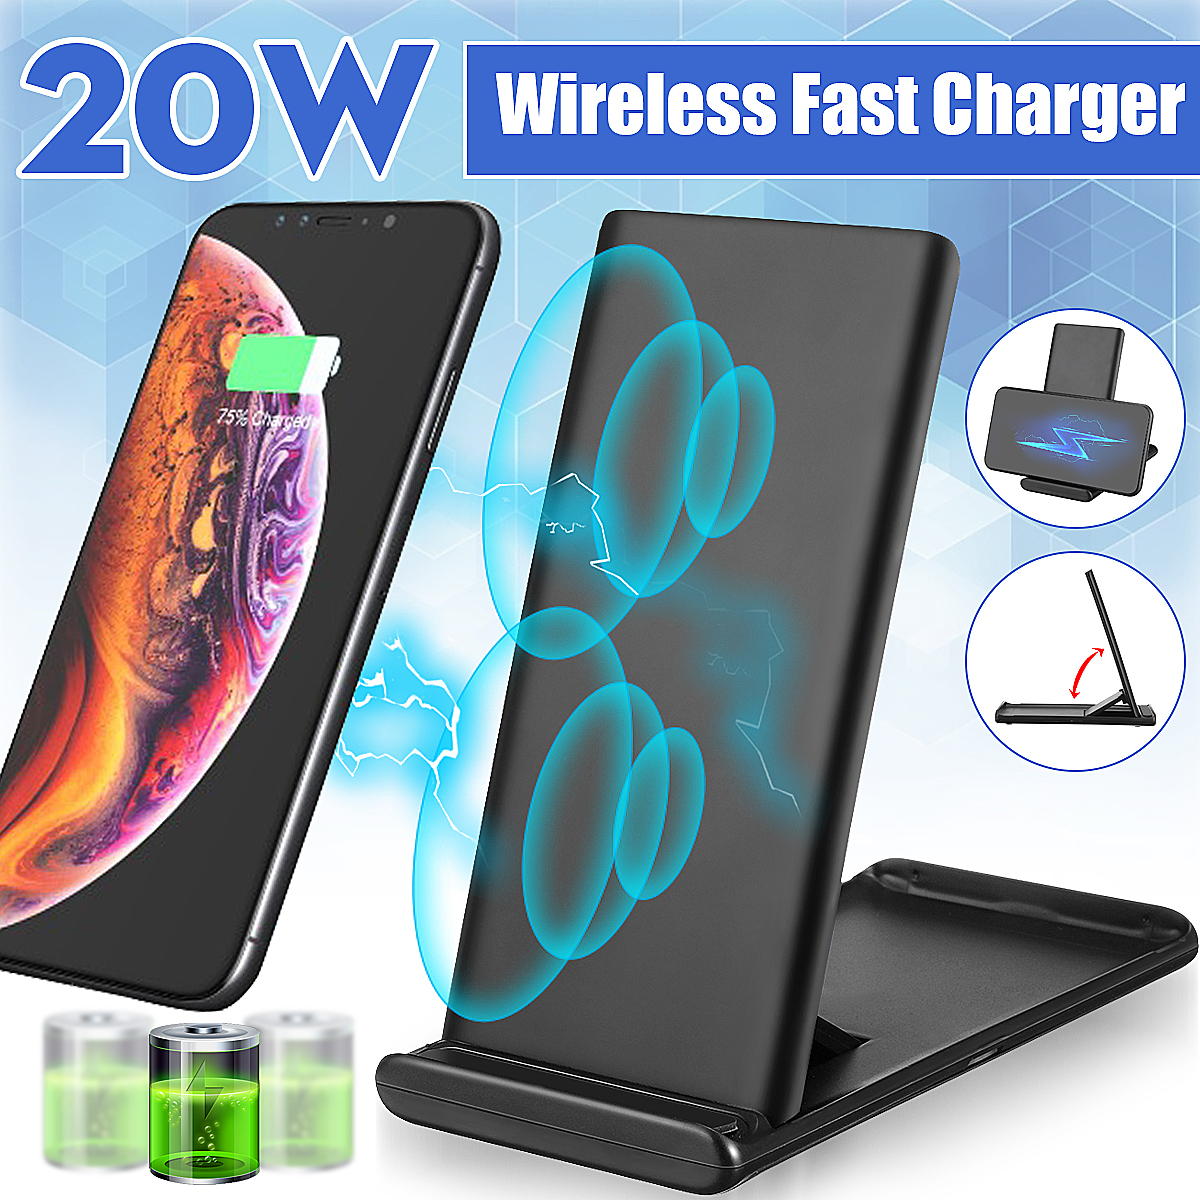 Bakeey 20W Qi Wireless Fast Charger Charging Dock Station for iPhone Samsung Huawei